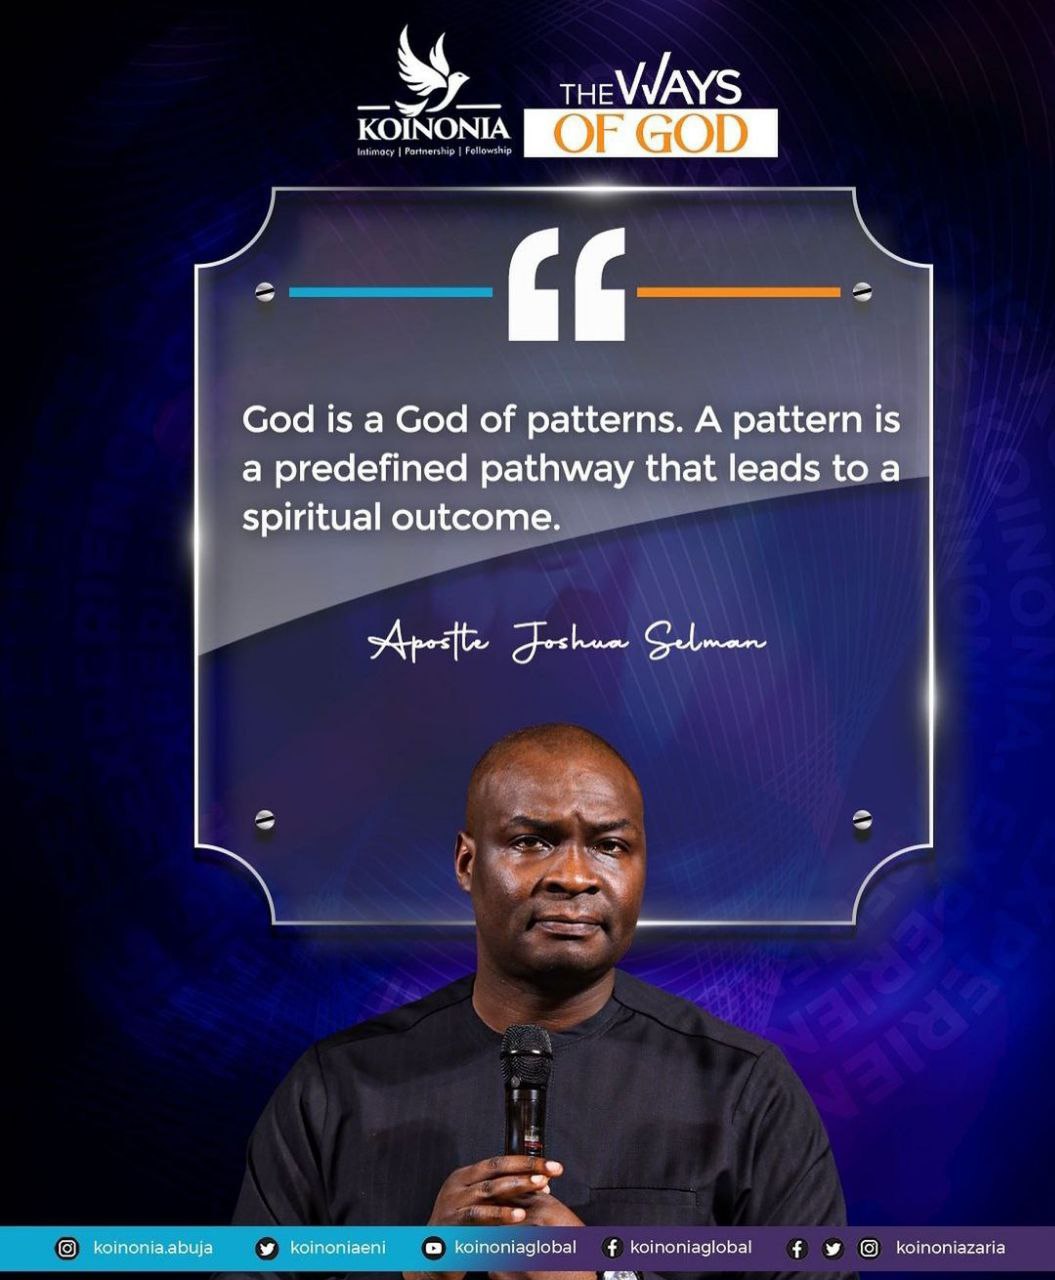 DOWNLOAD MP3: THE WAYS OF GOD by Apostle Joshua Selman (May 7, 2023) 18